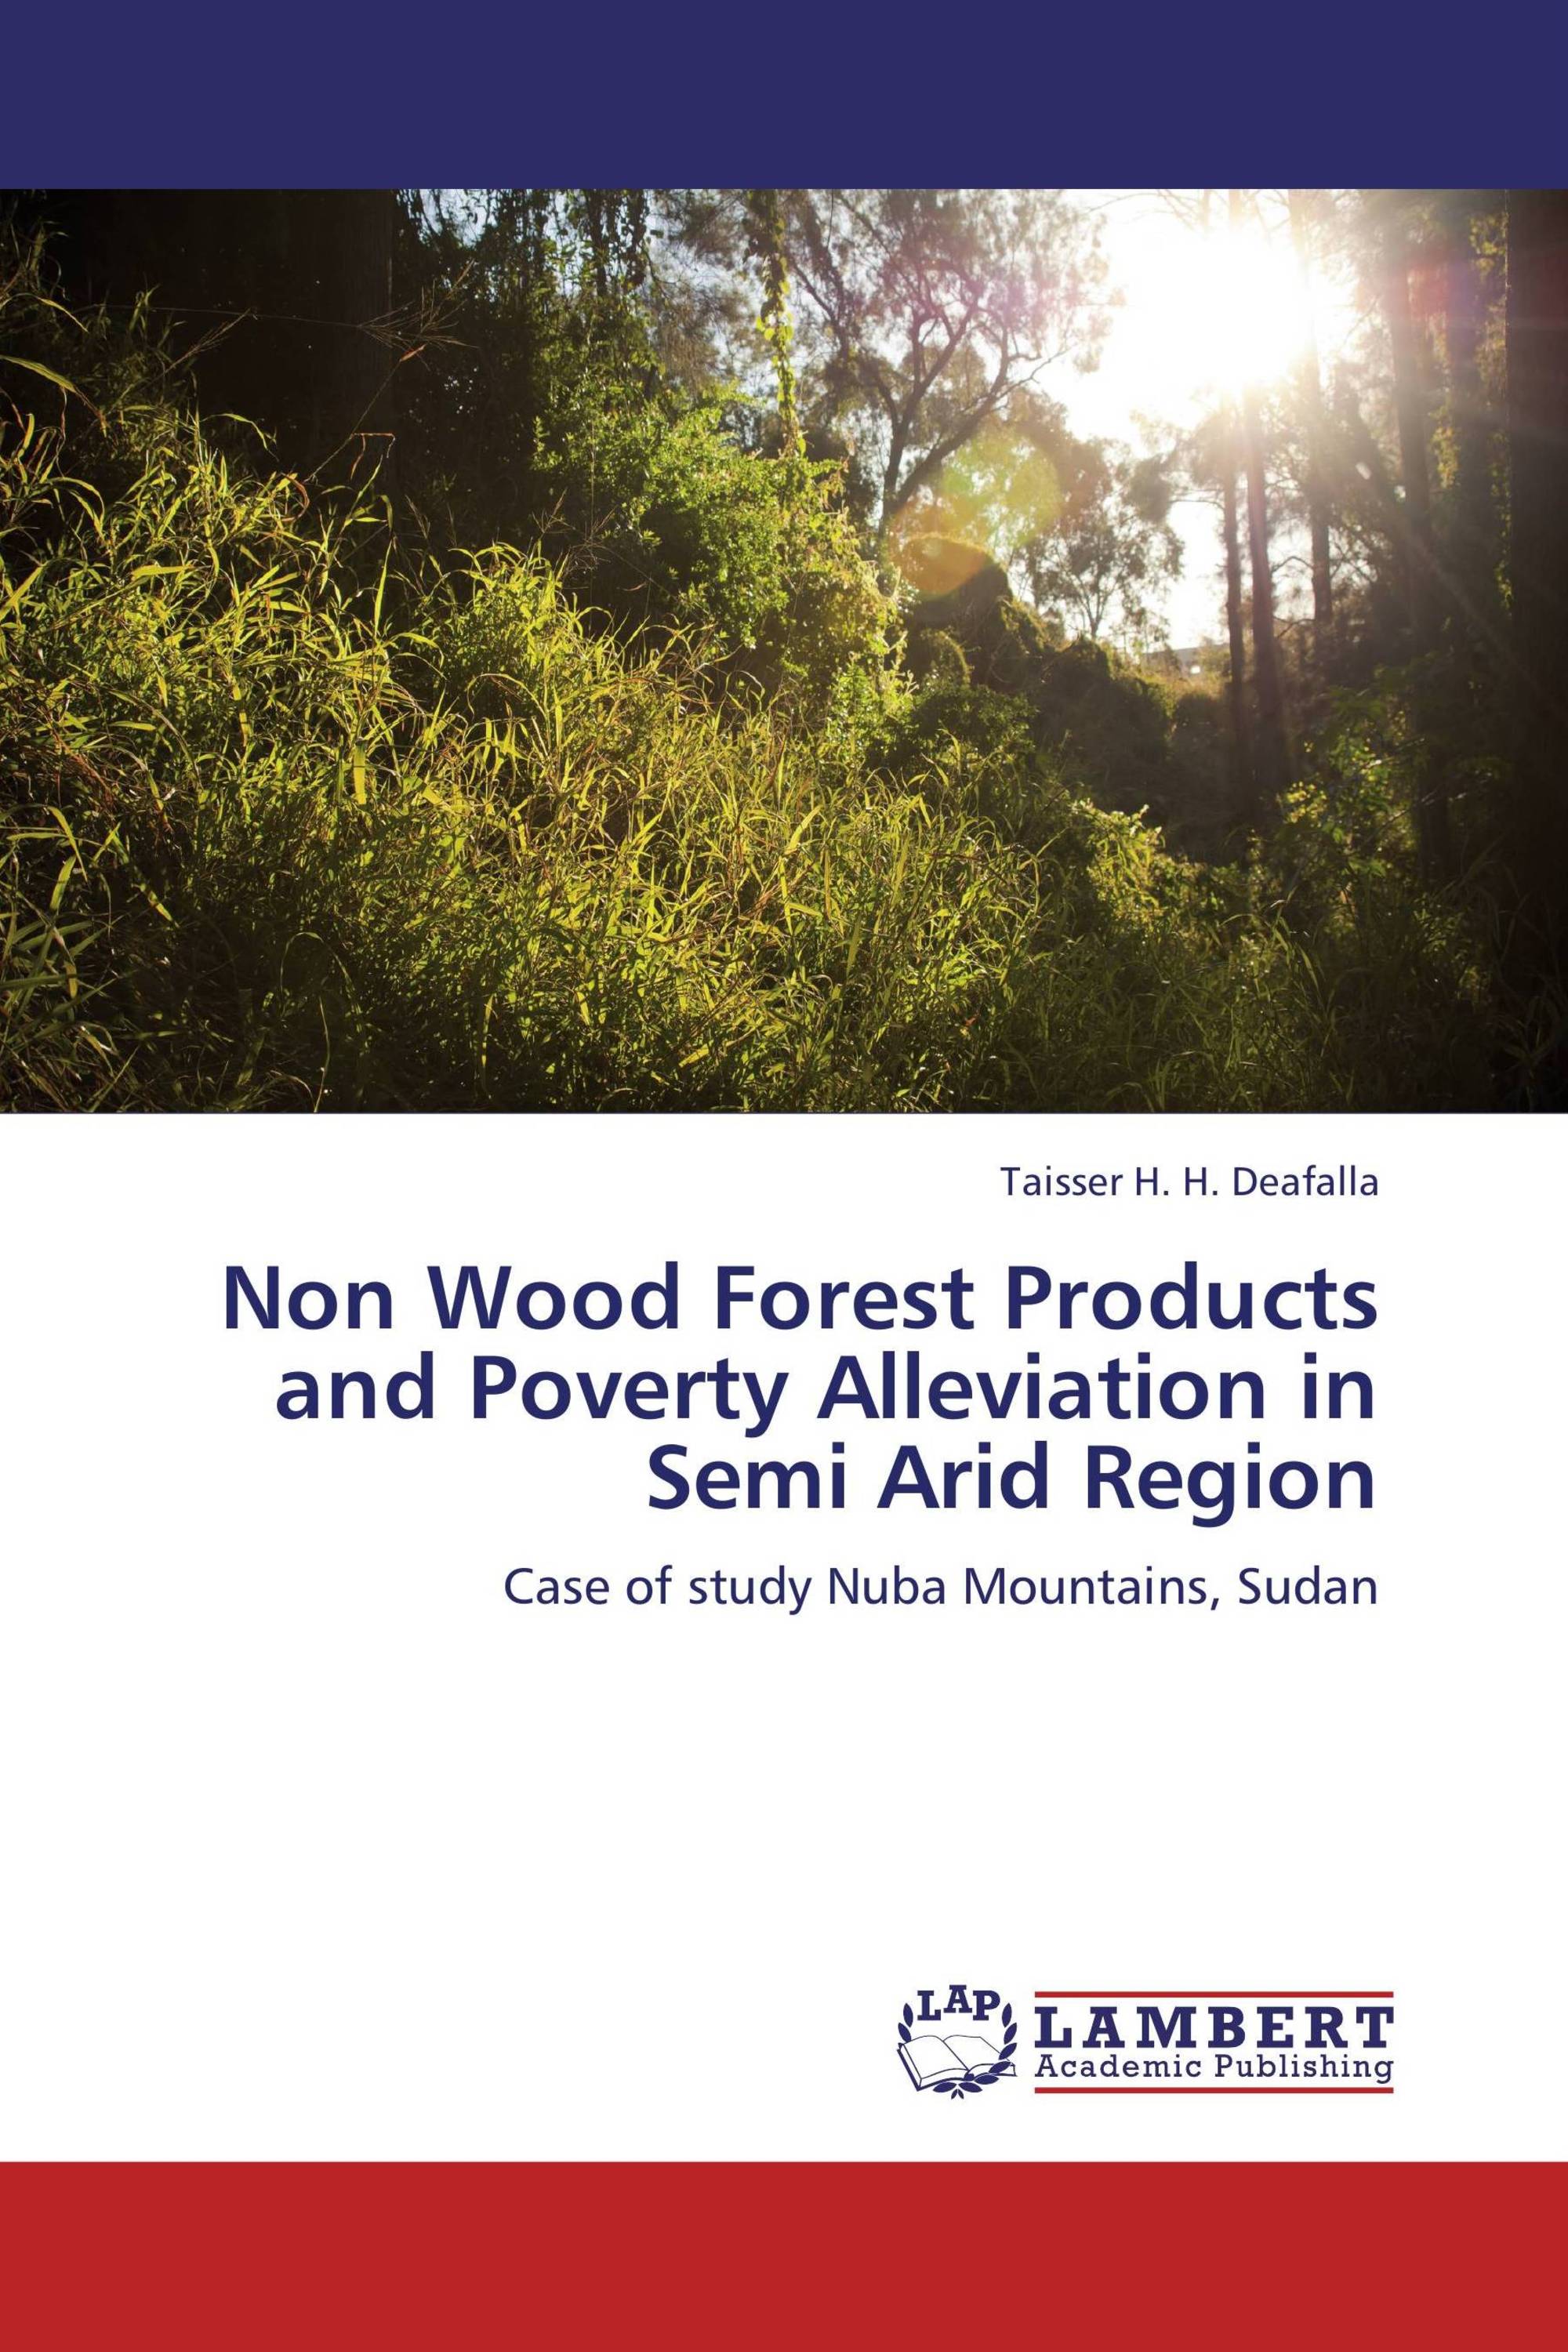 Non Wood Forest Products and Poverty Alleviation   in Semi Arid Region